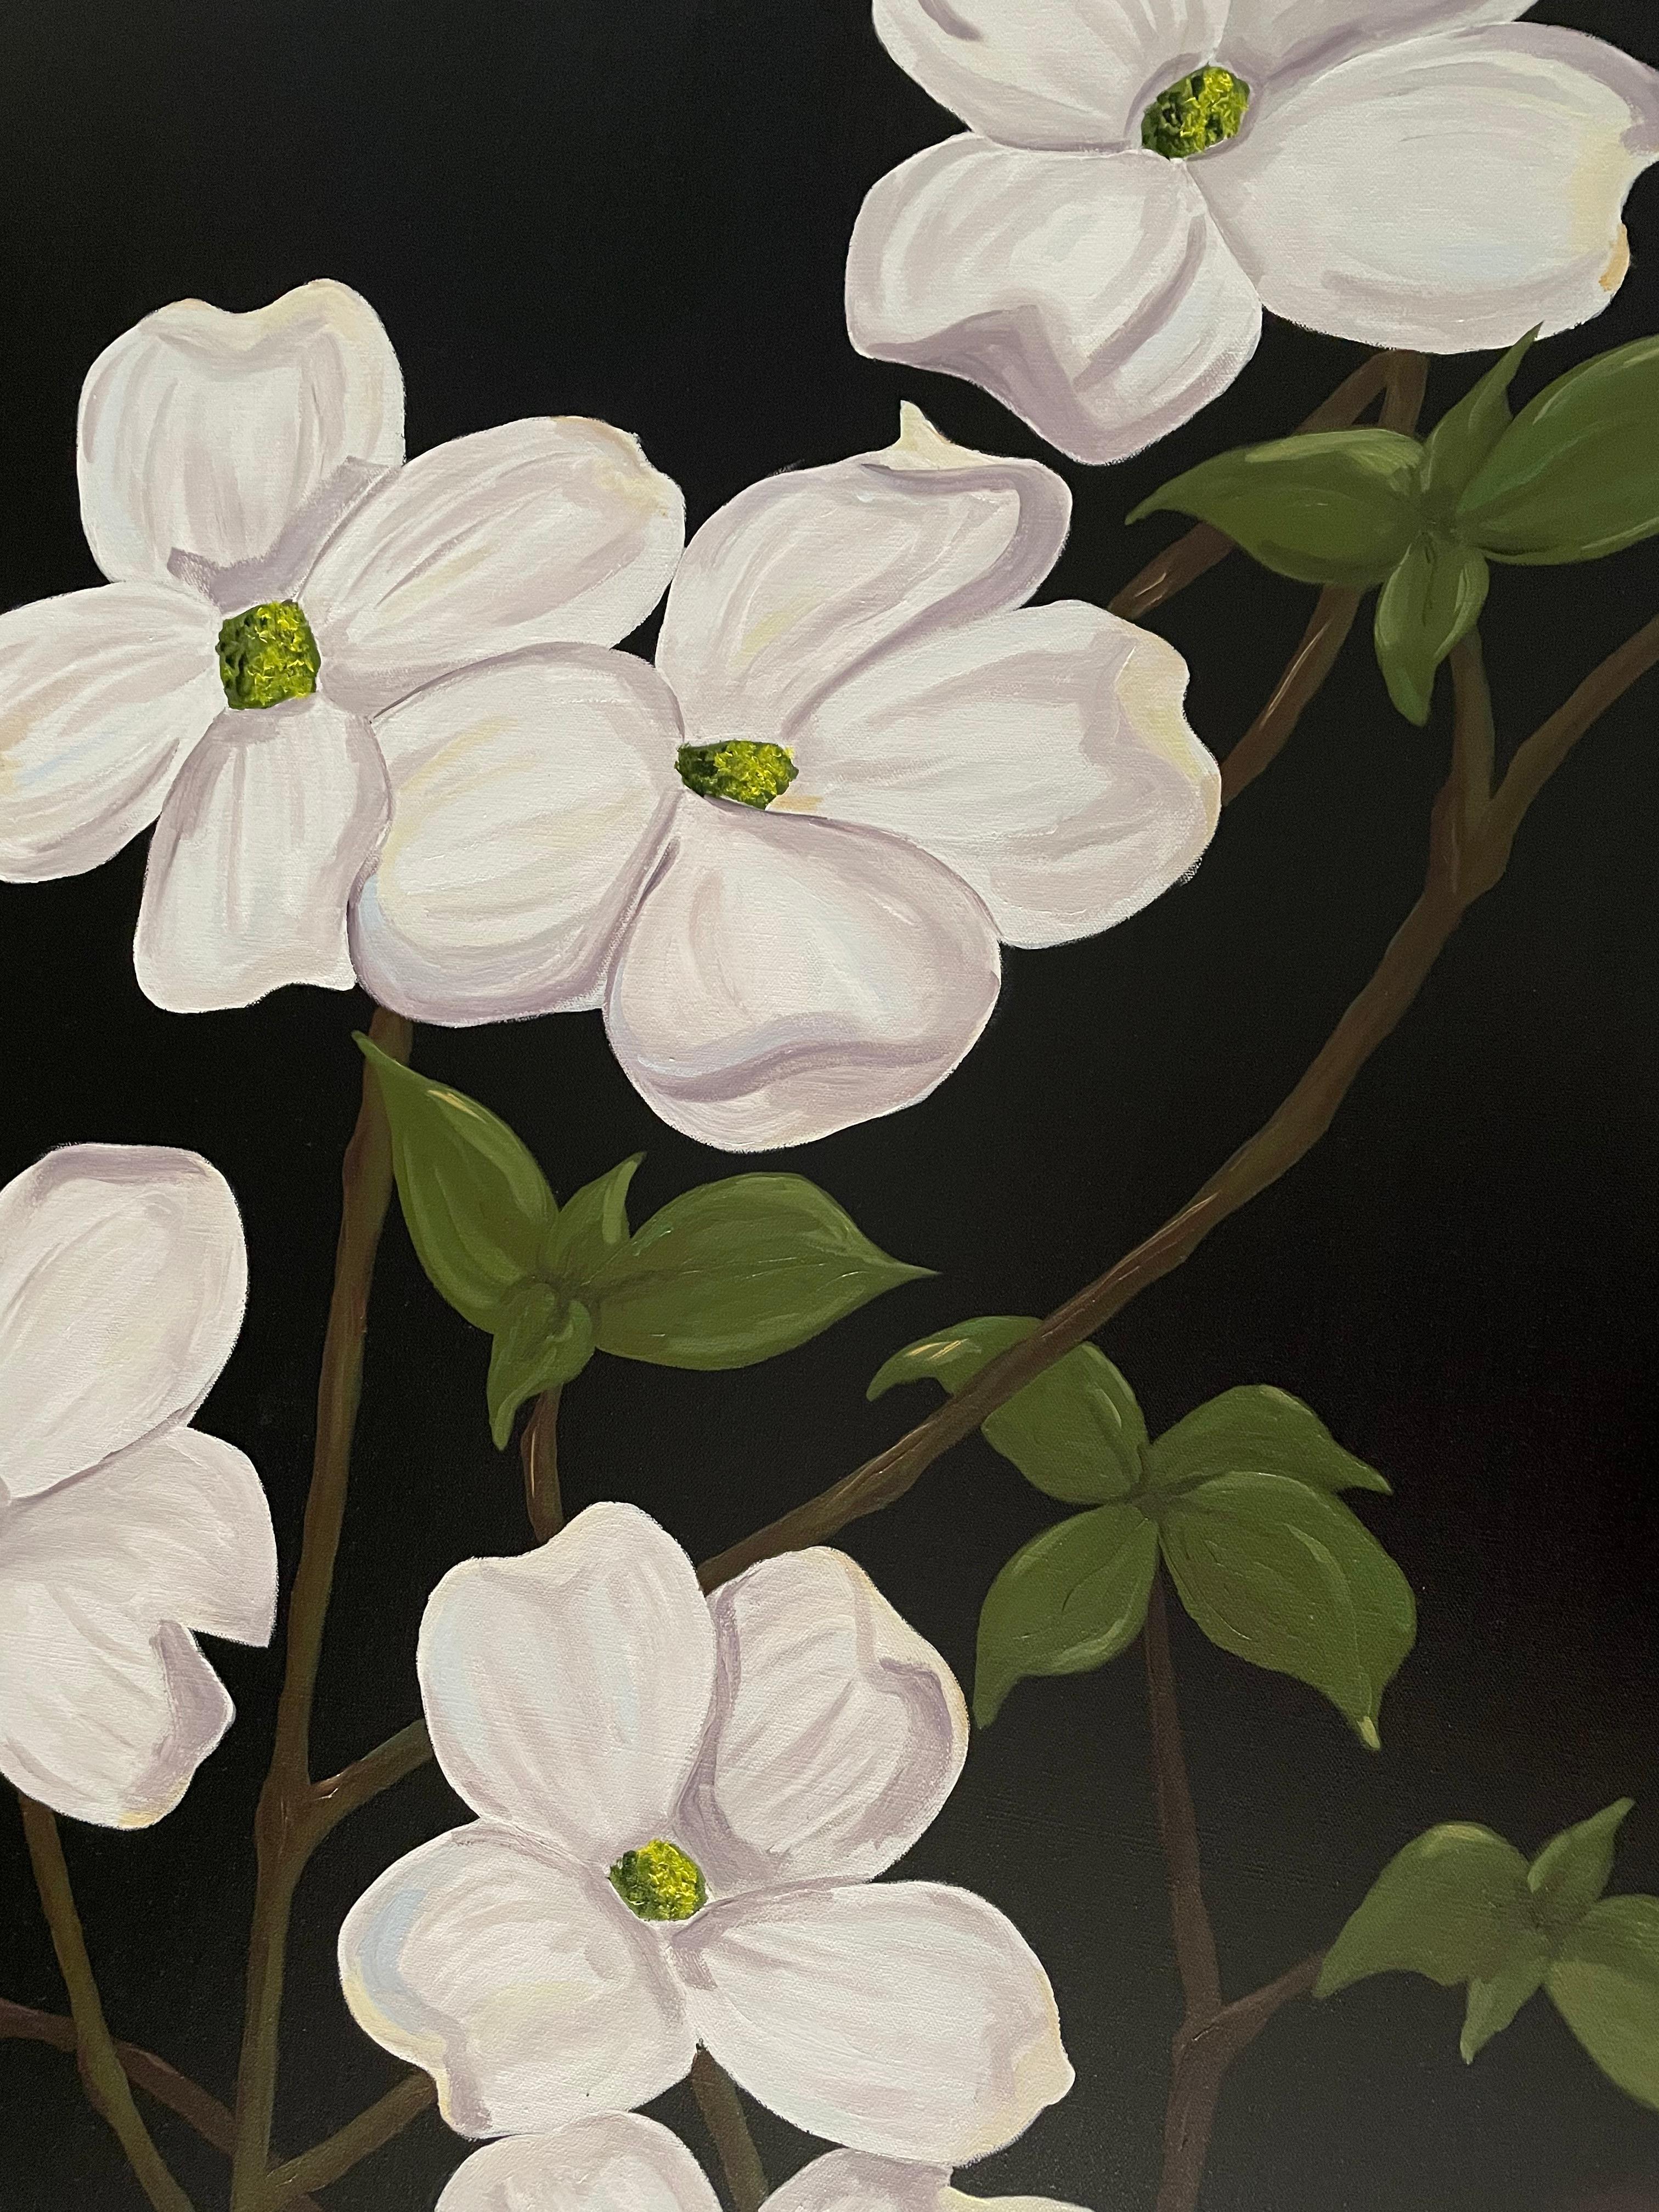 Jubilant White Flowers with Verdant Leaves on Branches. Title - Wild Dogwood For Sale 2